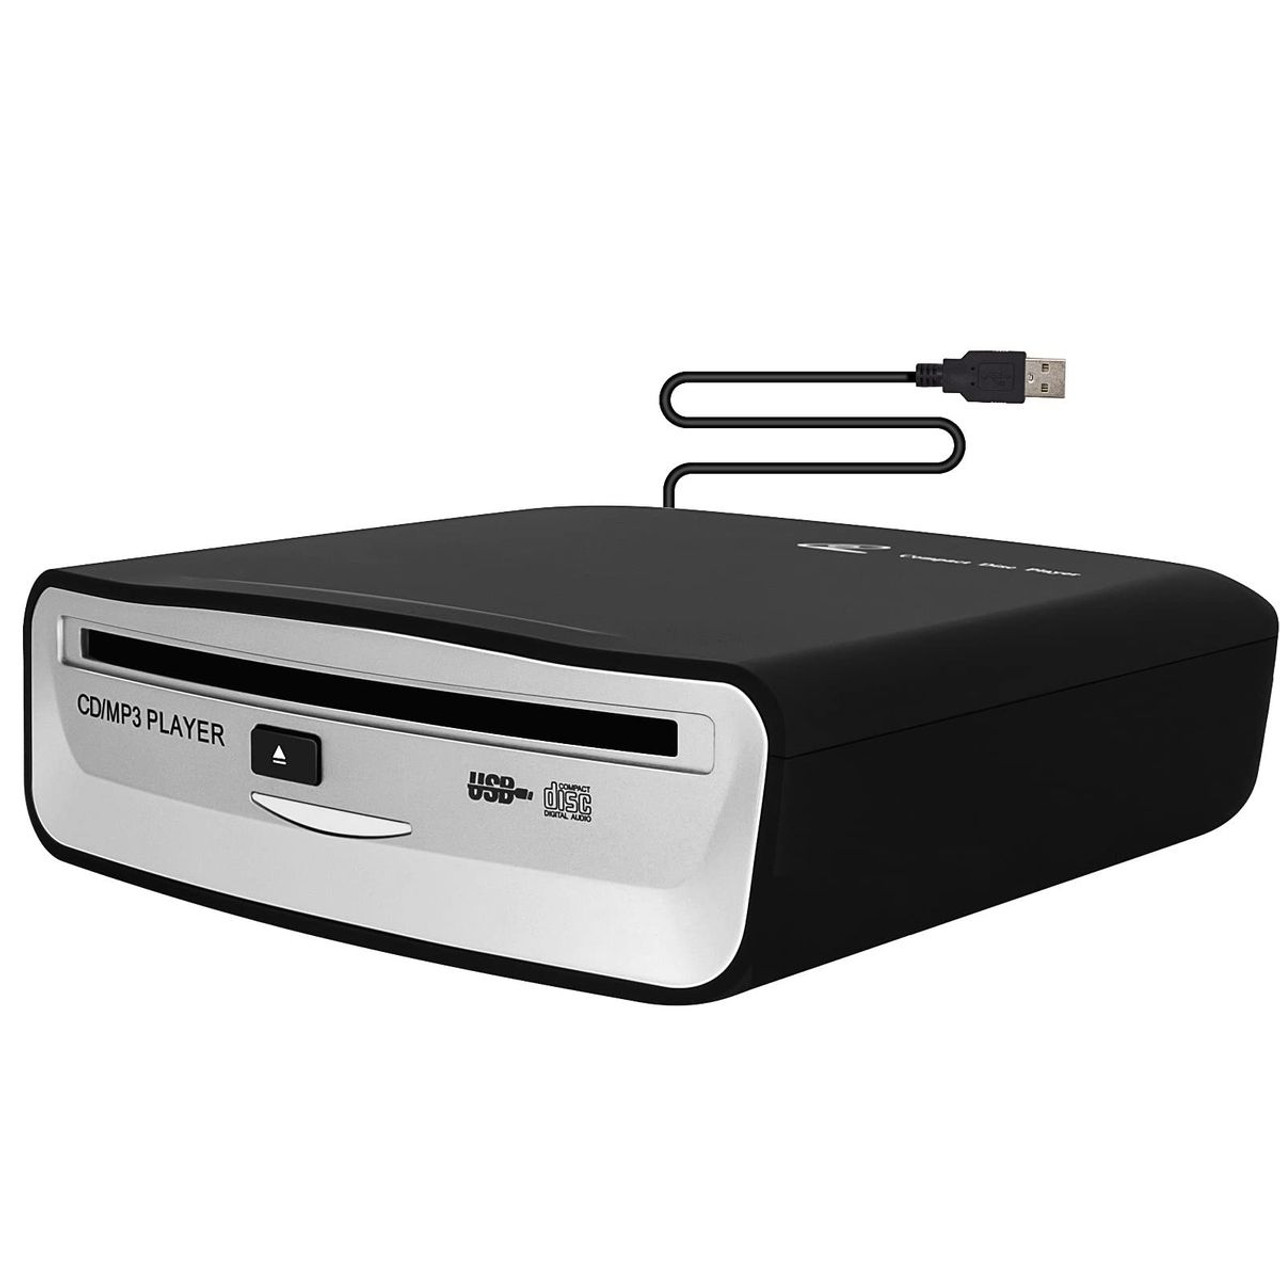 External Universal CD Player for Car,Portable CD Player with Extra USB Extension Cable,Plugs into Car USB Port,Laptop,TV,Mac,Computer,for Android 4.4 and Above Navigation product image